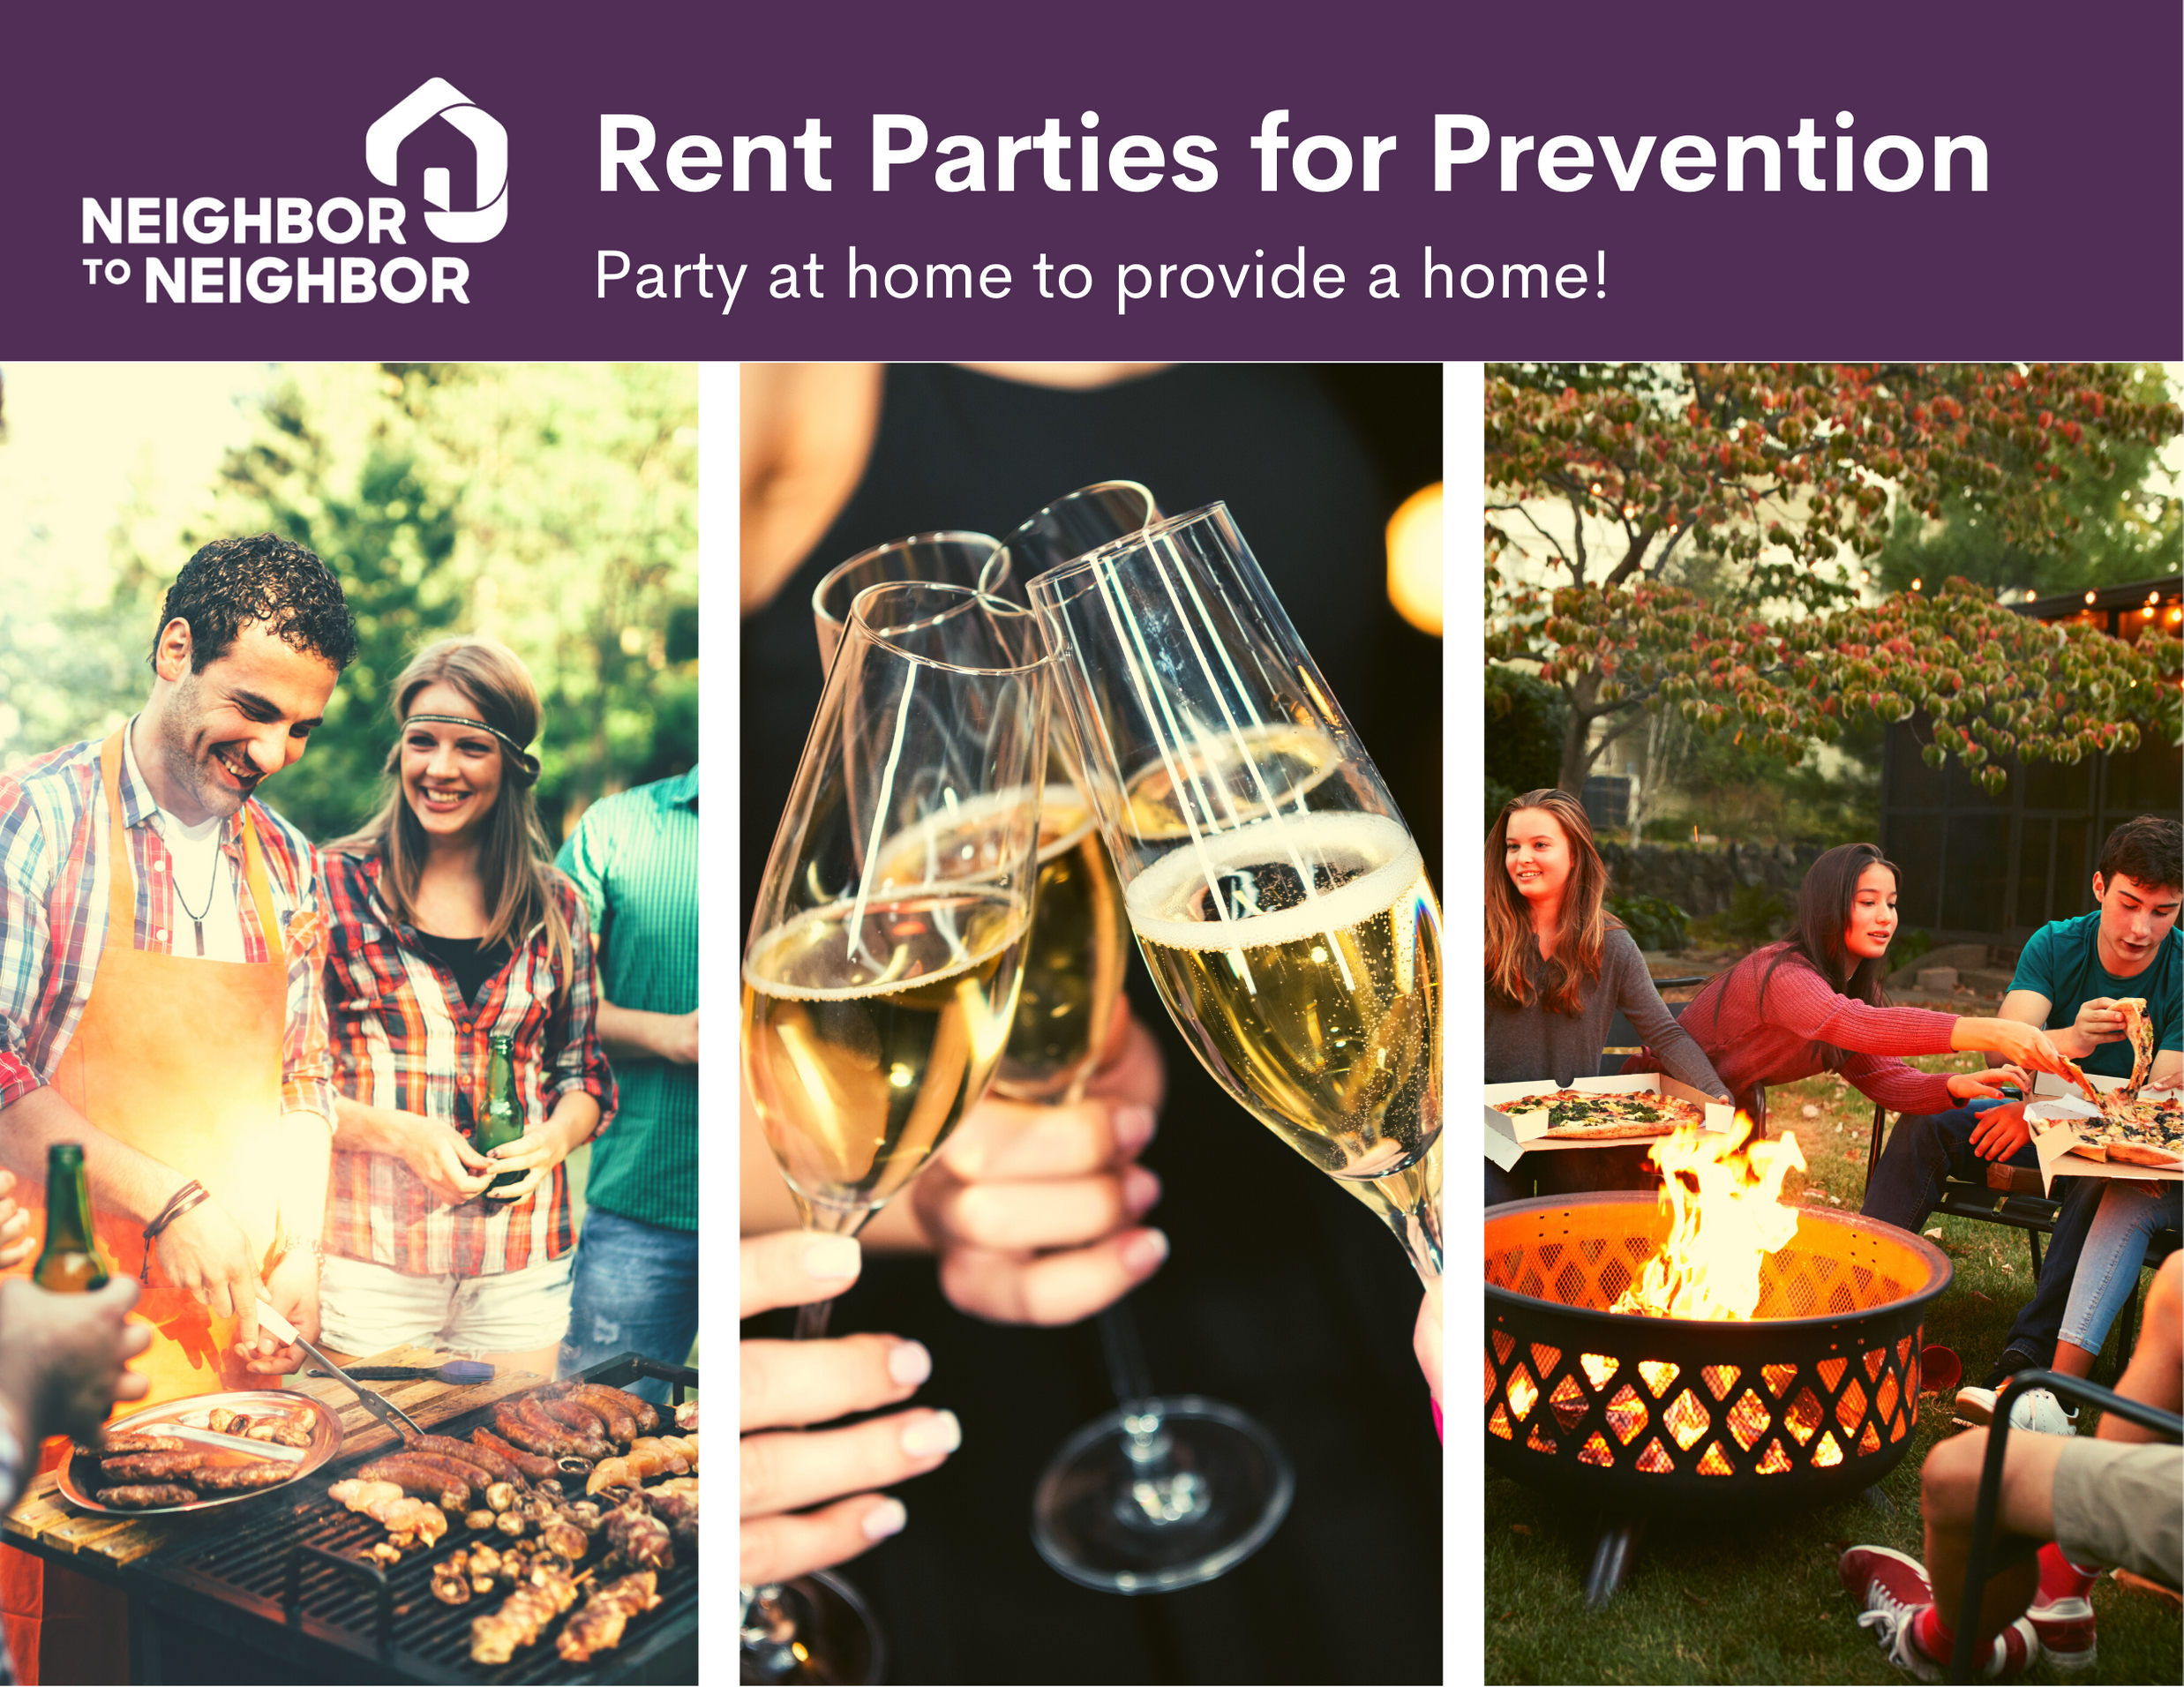 Rent Parties for Prevention shows different types of parties